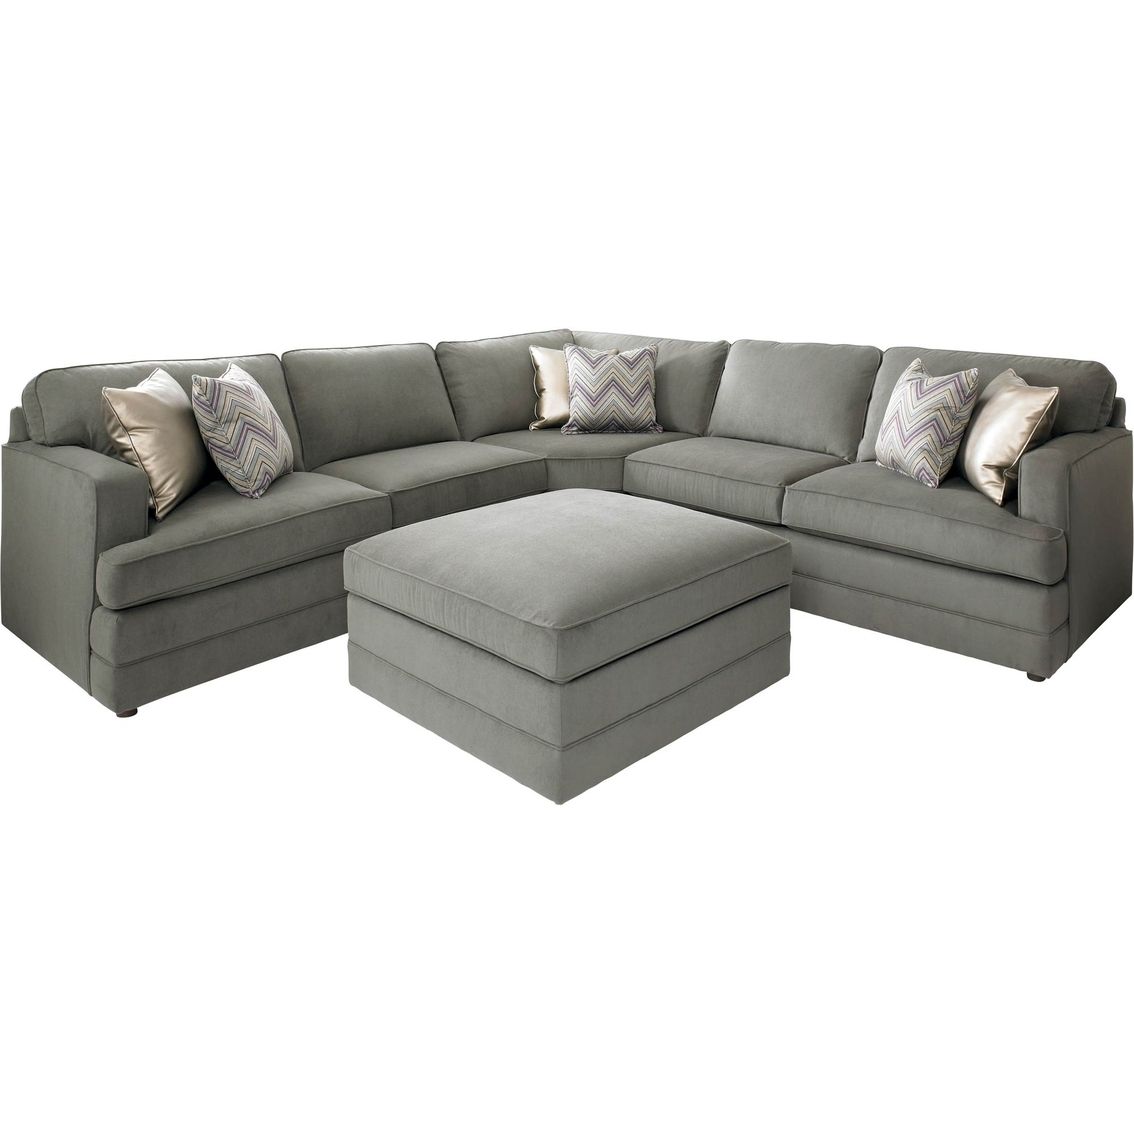 Most Recent Sectional Sofas At Bassett Inside Bassett Dalton L Shaped Sectional Sofa With Ottoman (View 11 of 20)